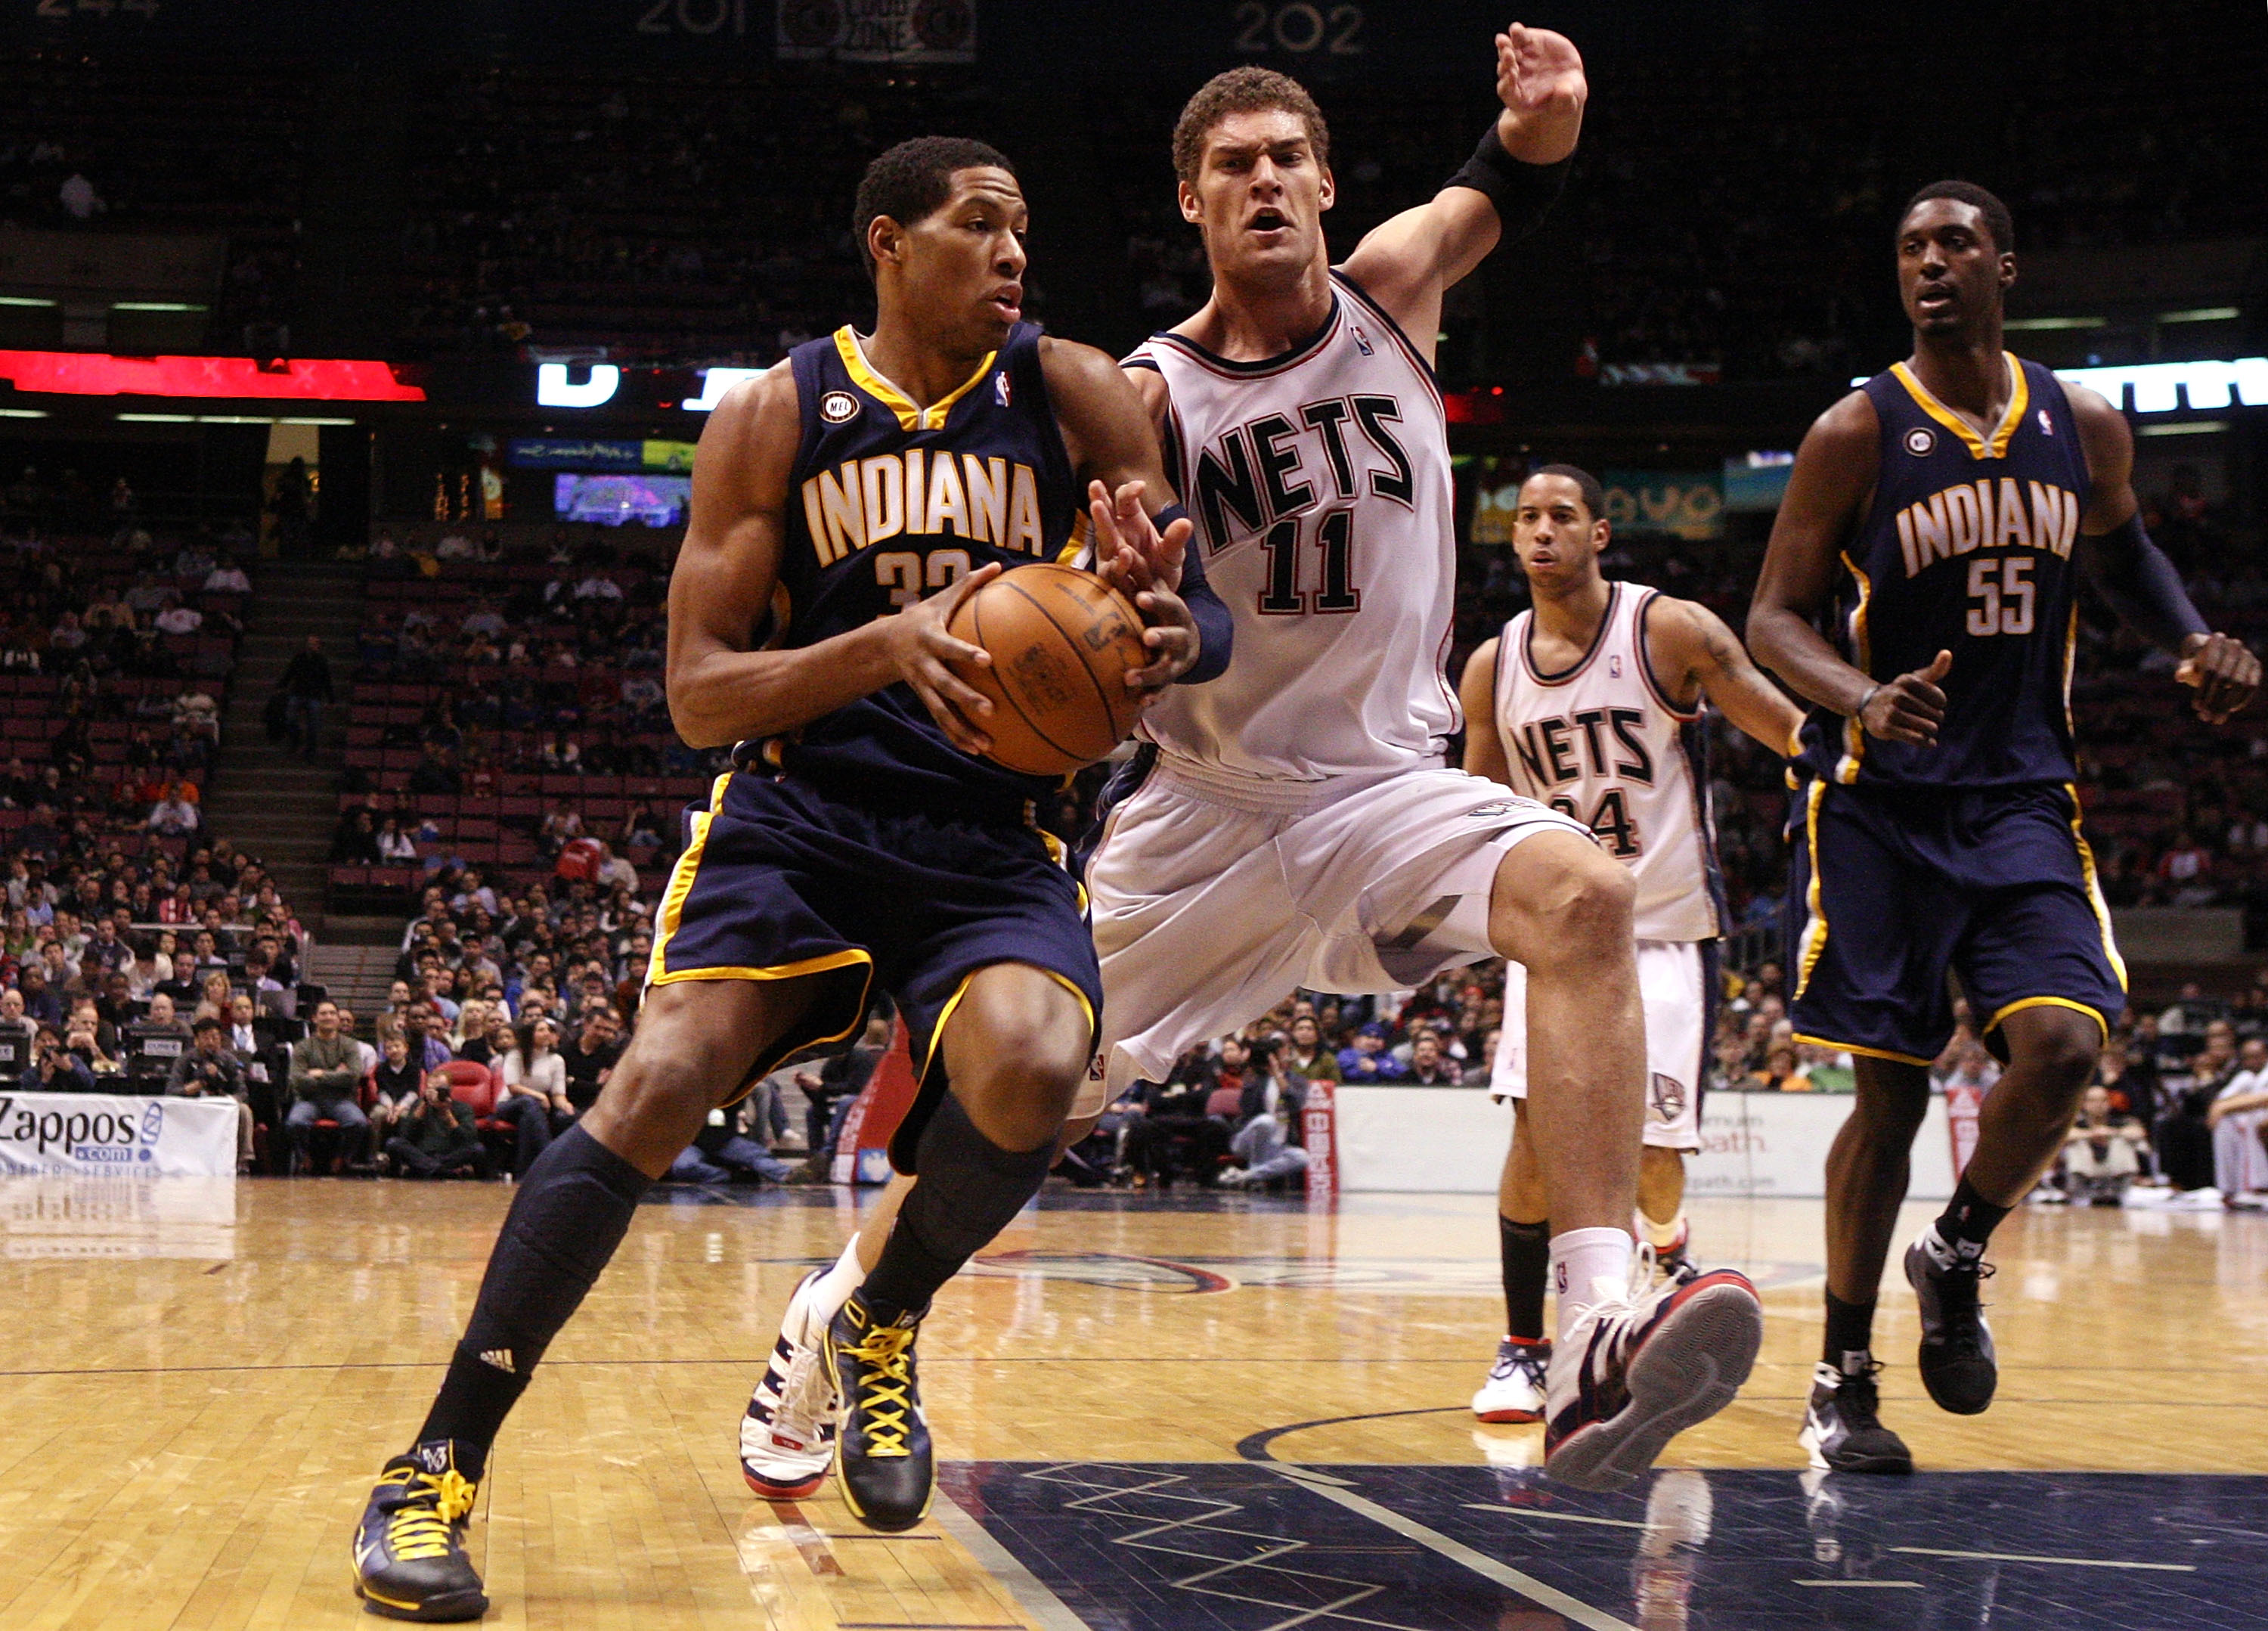 EAST RUTHERFORD, NJ - JANUARY 15:  Danny Granger #33 of the Indiana Pacers drives against Brook Lopez #11 of the New Jersey Nets at the Izod Center on January 15, 2010 in East Rutherford, New Jersey. NOTE TO USER: User expressly acknowledges and agrees th